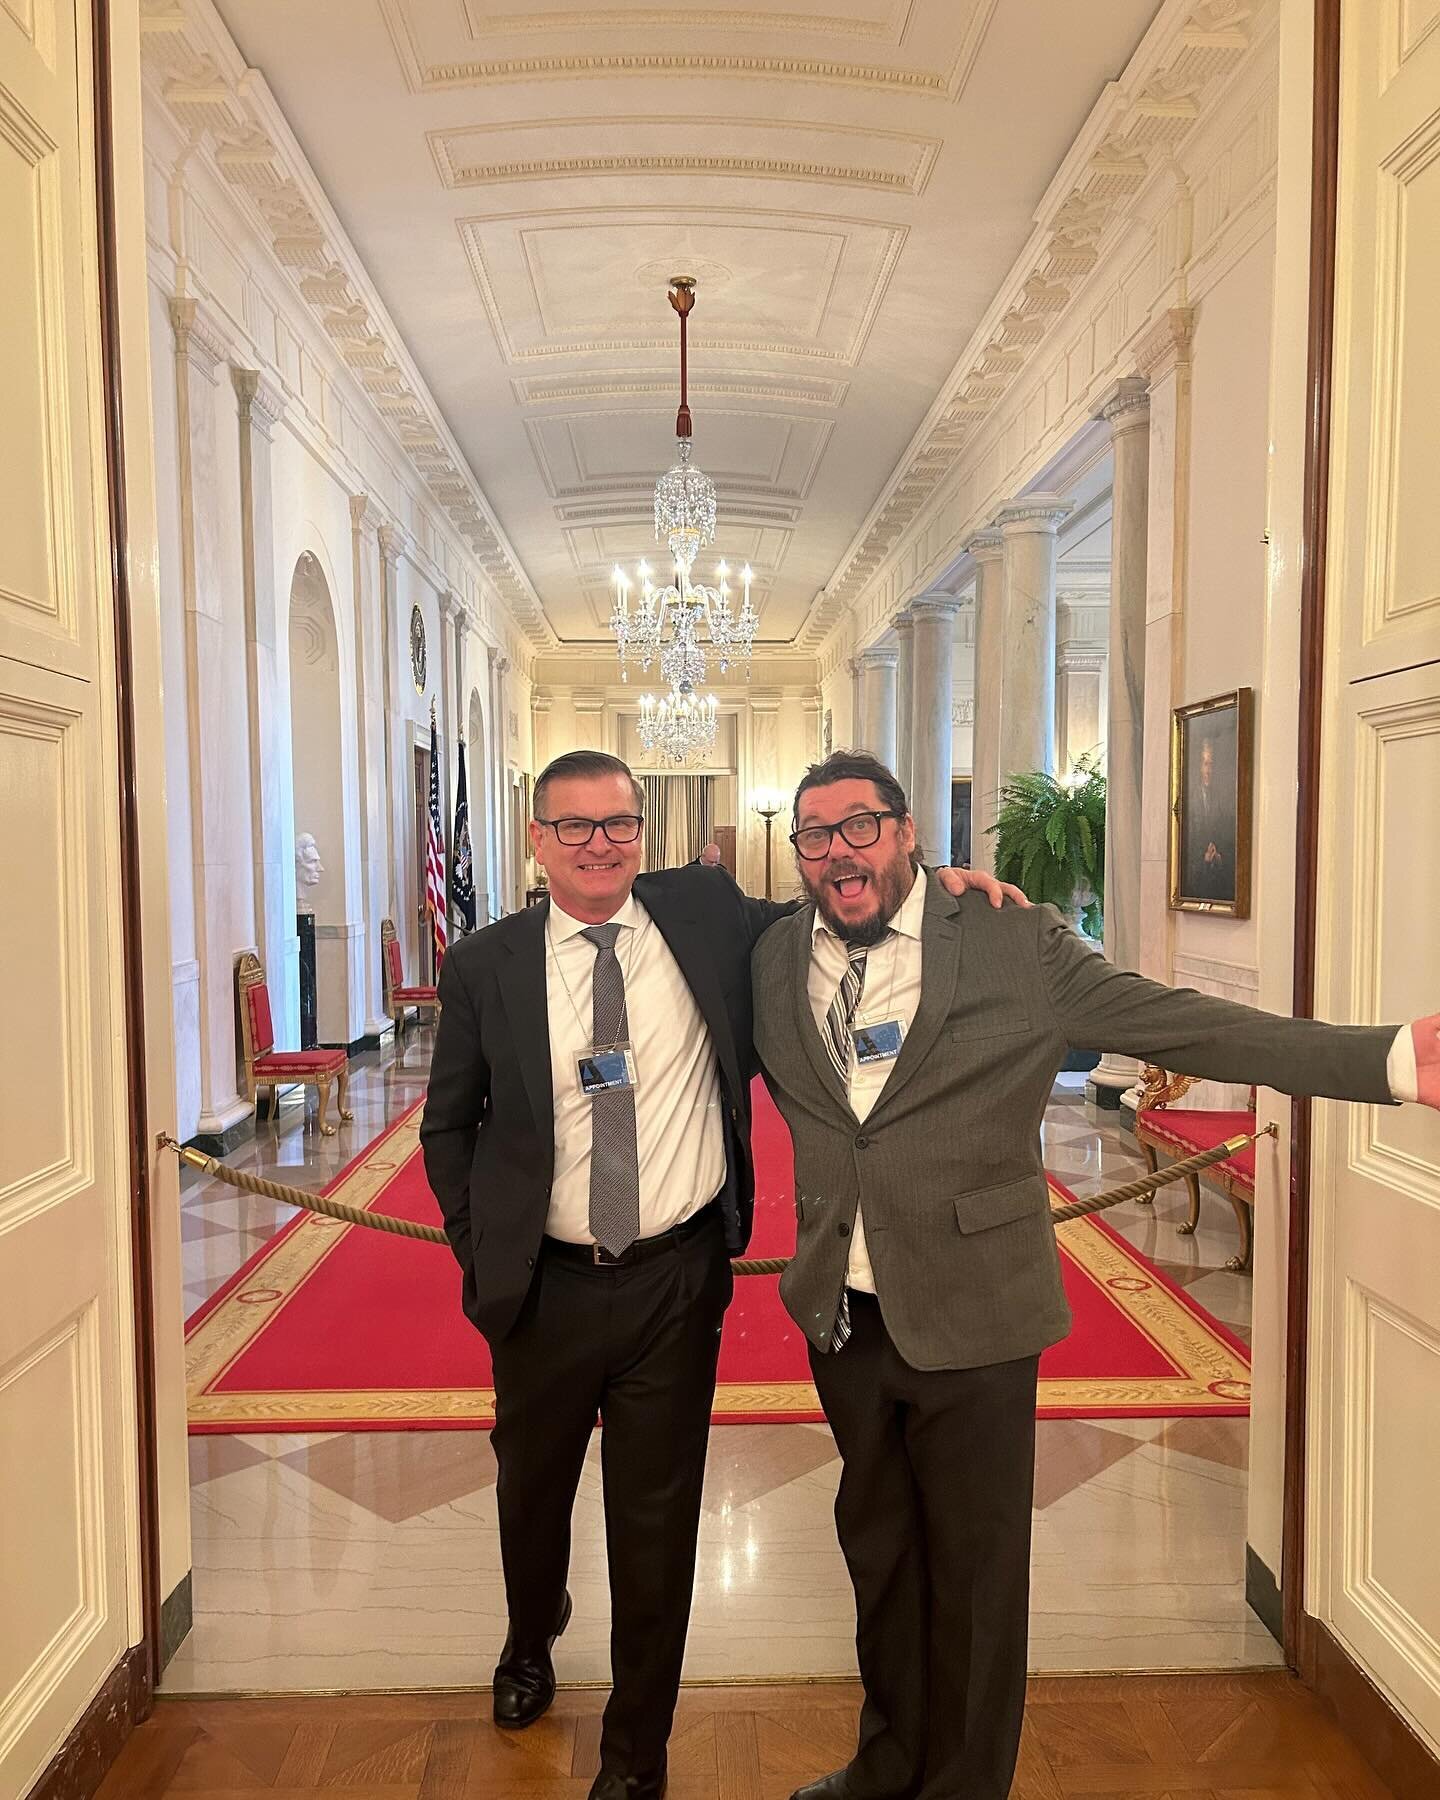 So yes. I actually did get to go to the White House and have breakfast in the west wing last week. My new friends, Tim and Kevin made it happen. Tim is a former marine and the Host of my house concert in DC last week. He used to work at the White Hou